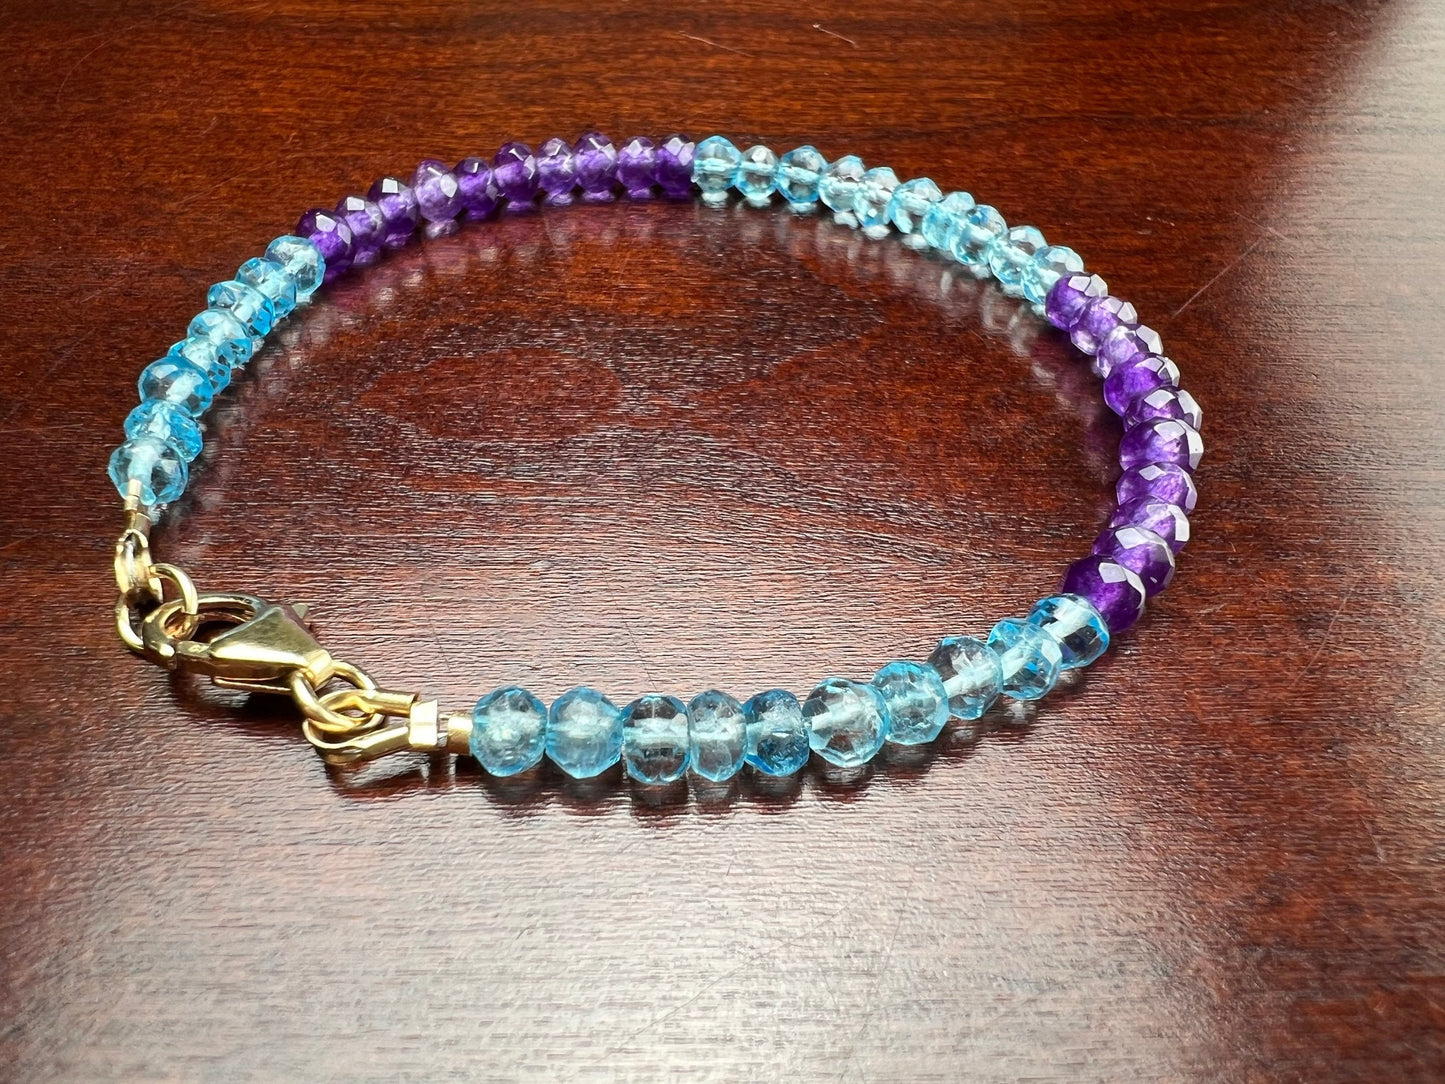 Amethyst, Blue Topaz 4mm Faceted Bracelet in 14k Gold Filled lobster Clasp and Findings, Healing Chakra gift